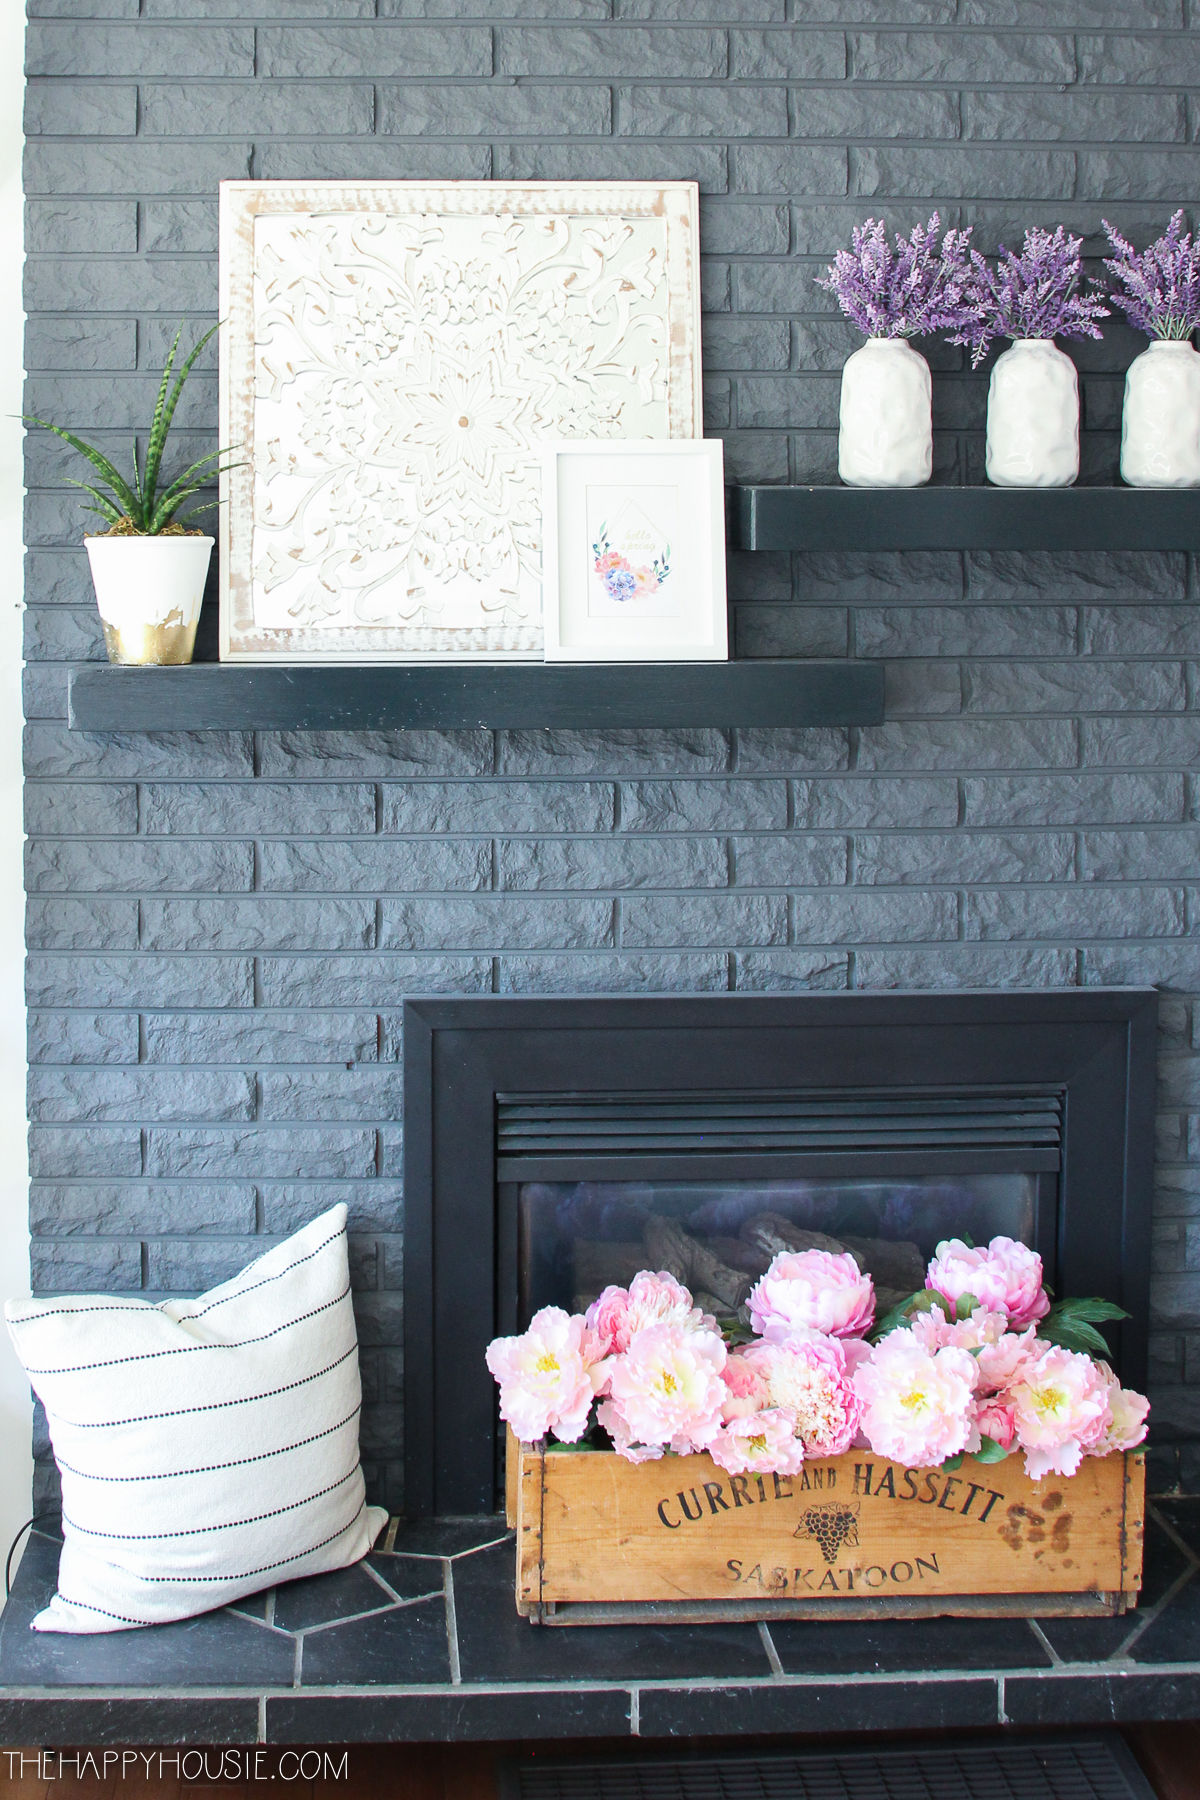 The mantel decor is vases with lilac and small pictures and a potted plant.